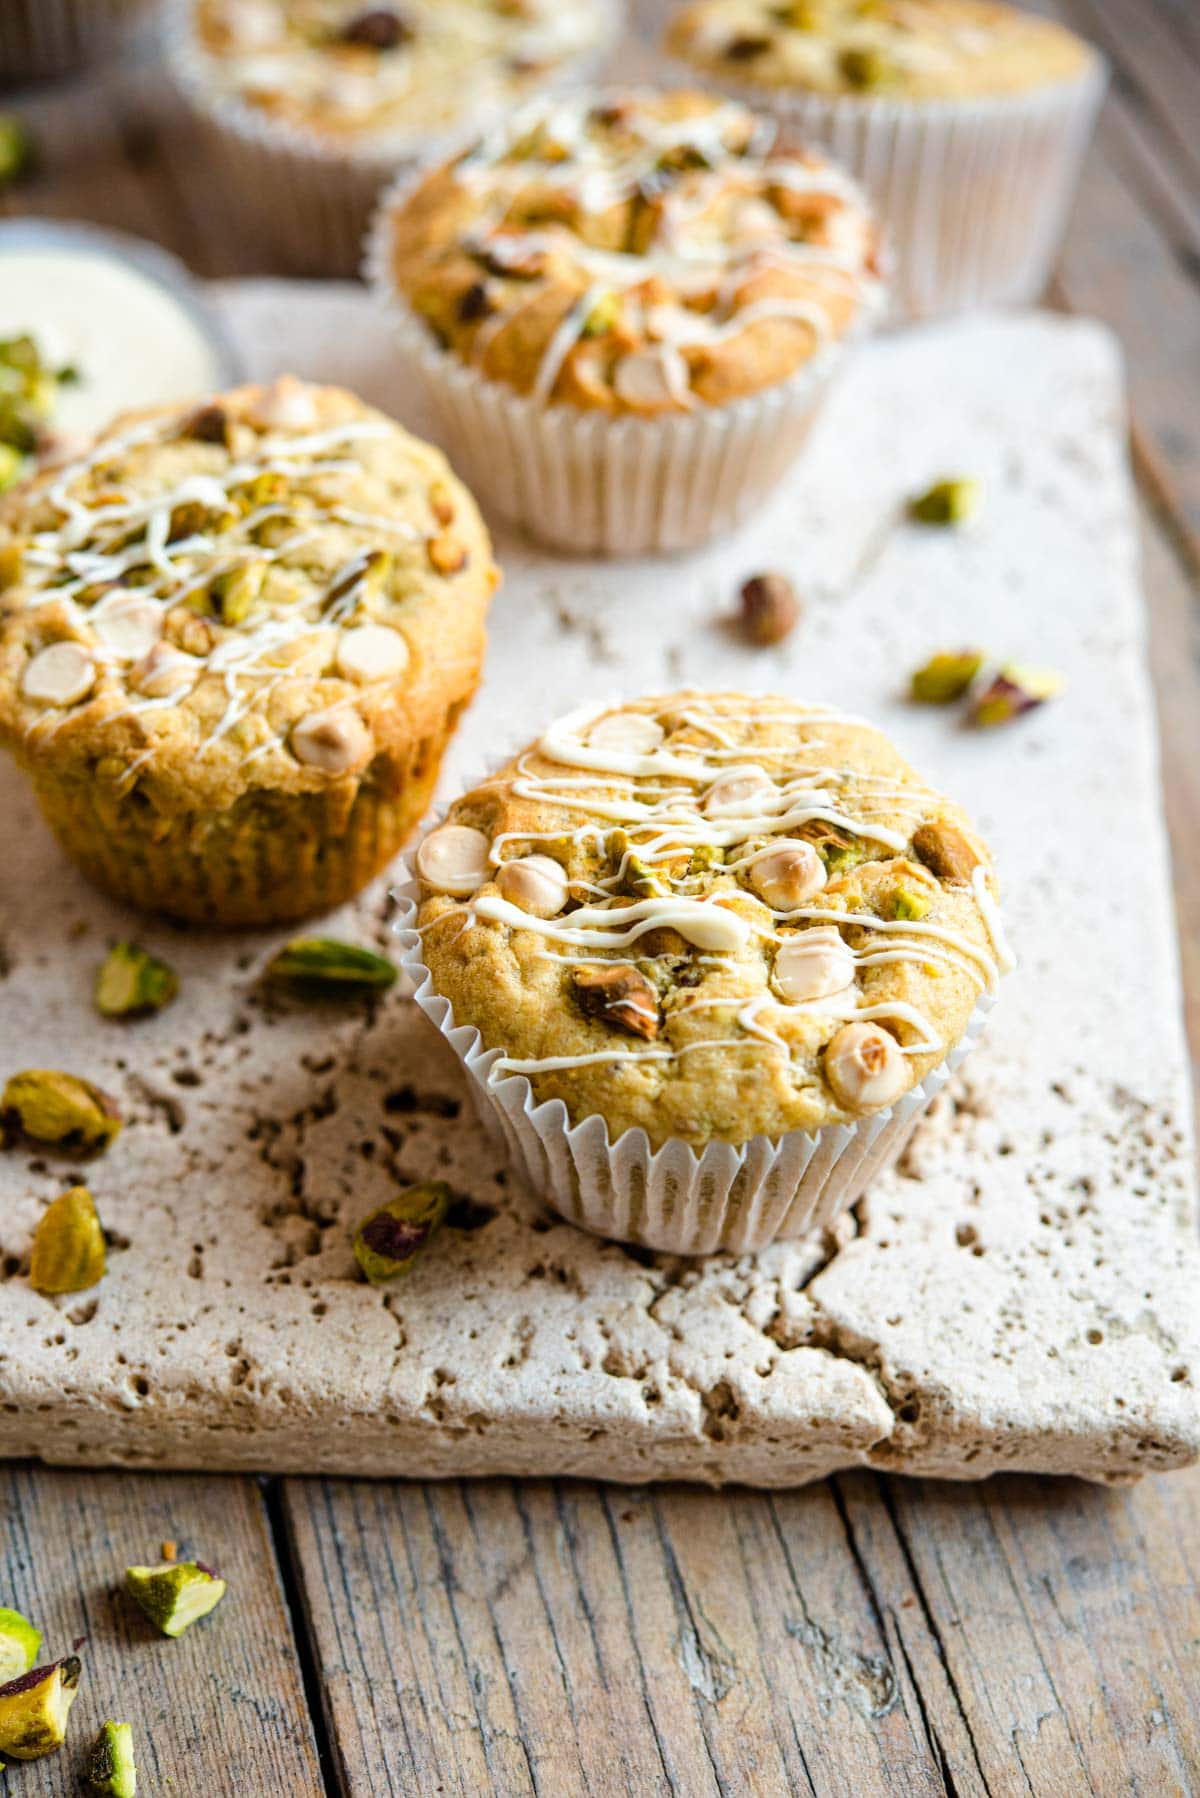 Pistachio Muffins with White Chocolate Chips
